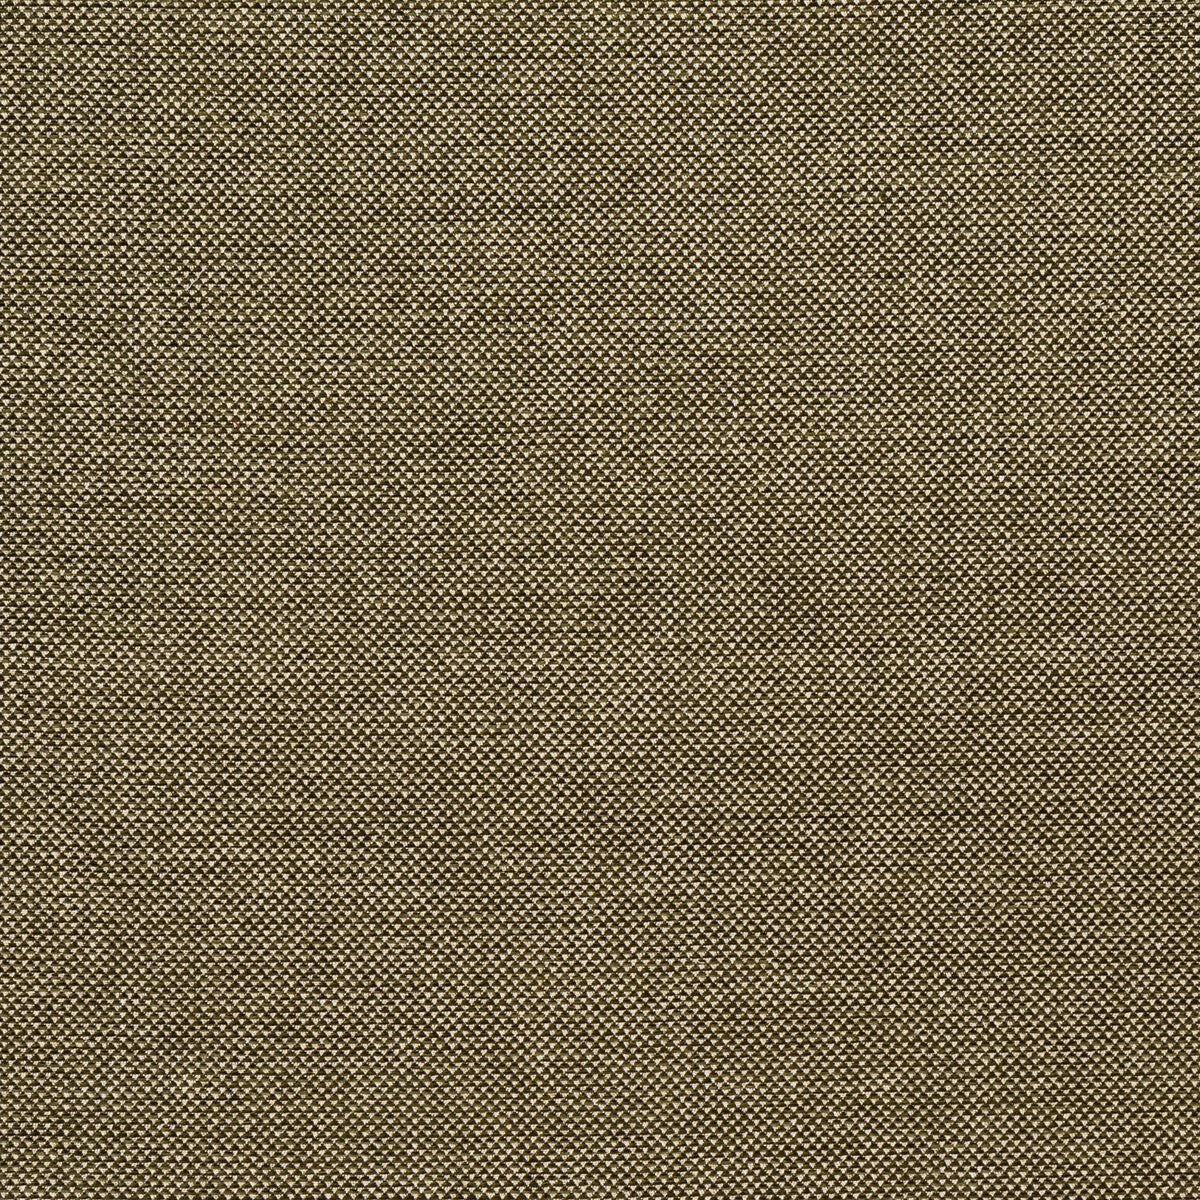 Webster fabric in moss color - pattern BFC-3713.30.0 - by Lee Jofa in the Blithfield Eden collection